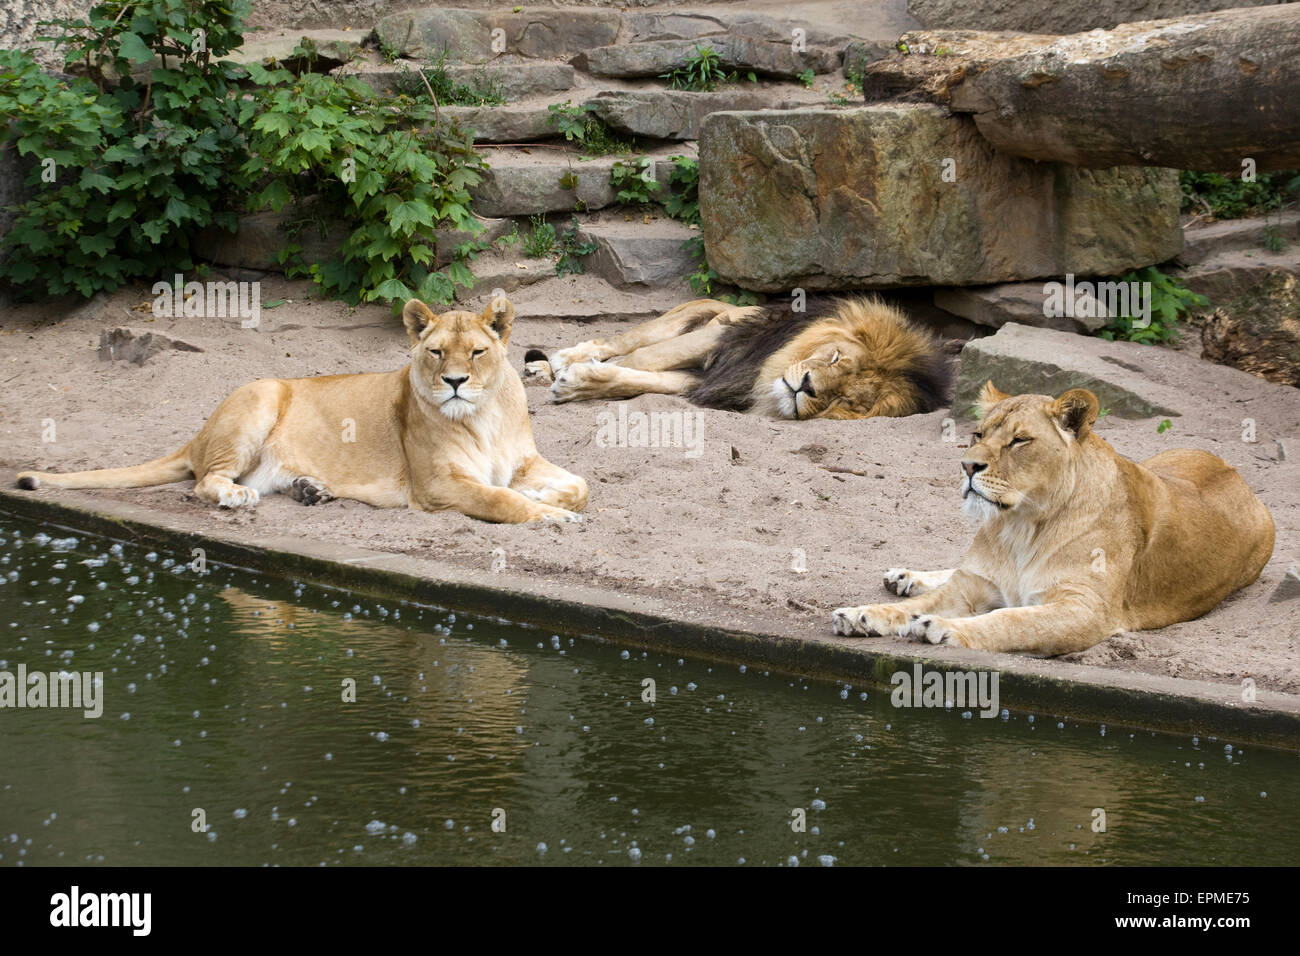 Pride of Lions relaxing in Captivity Stock Photo